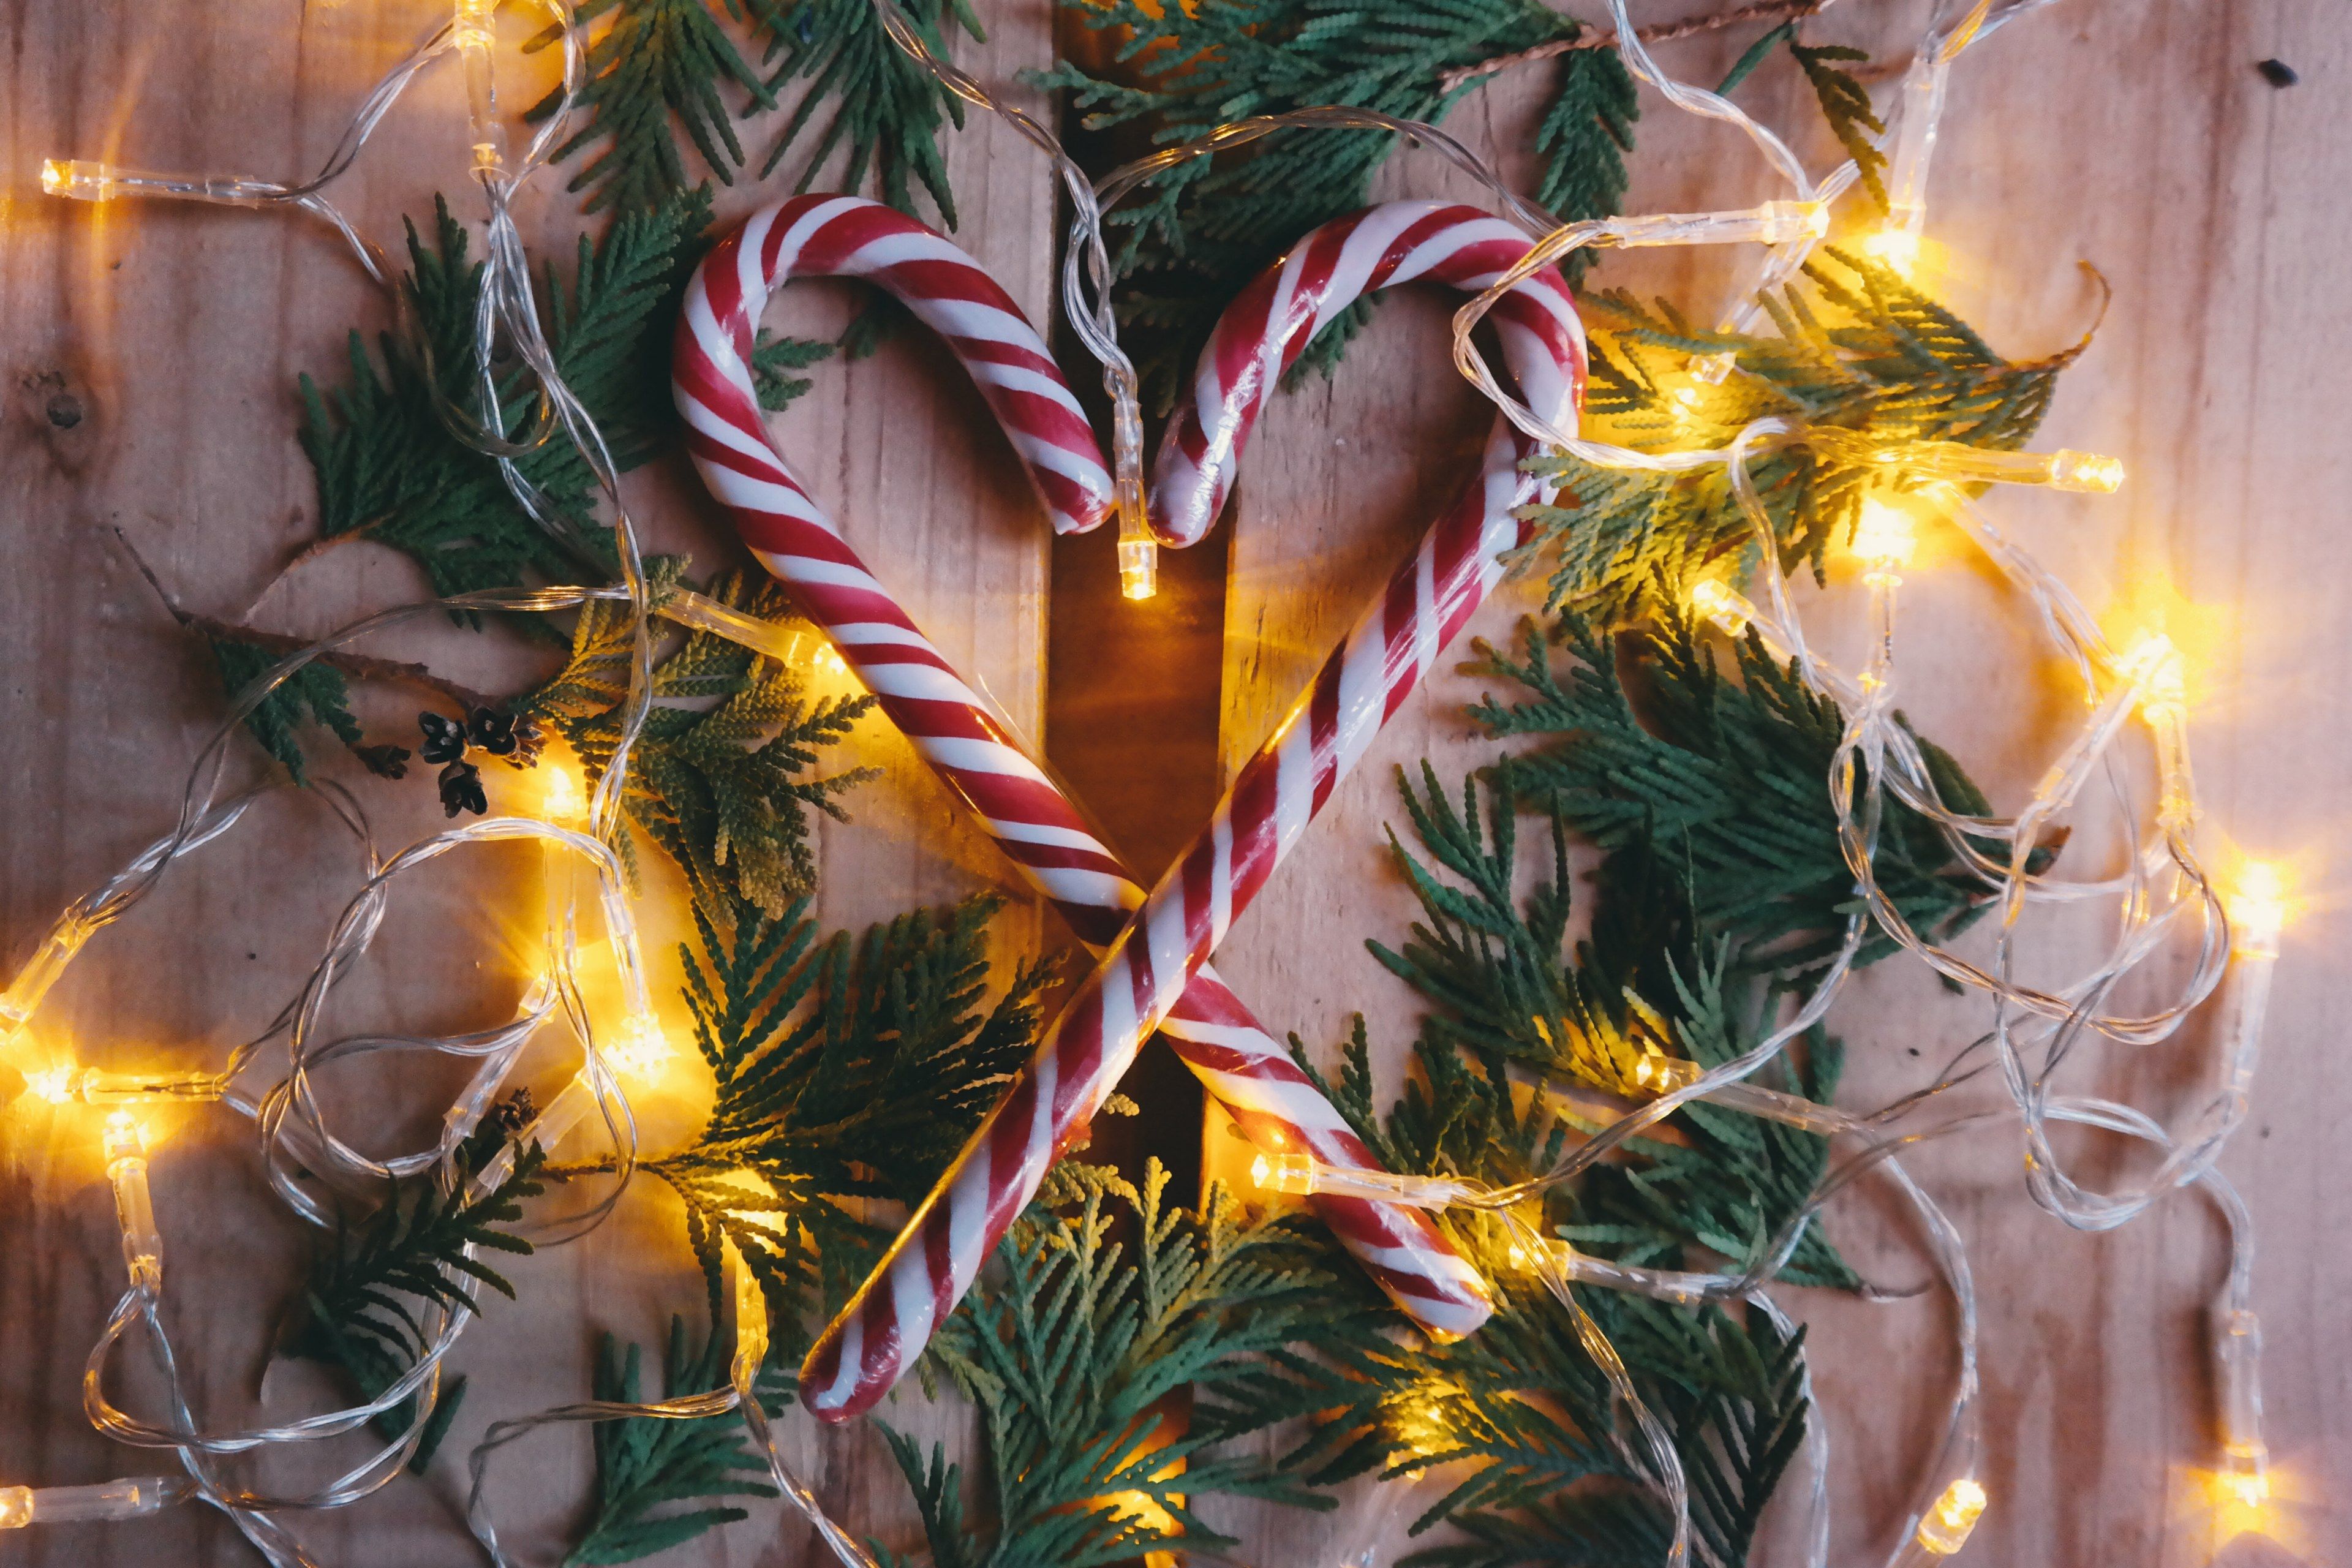 Wallpaper / candy canes sitting inside of a wreath surrounded by christmas lights, _wreath with candy canes 4k wallpaper free download